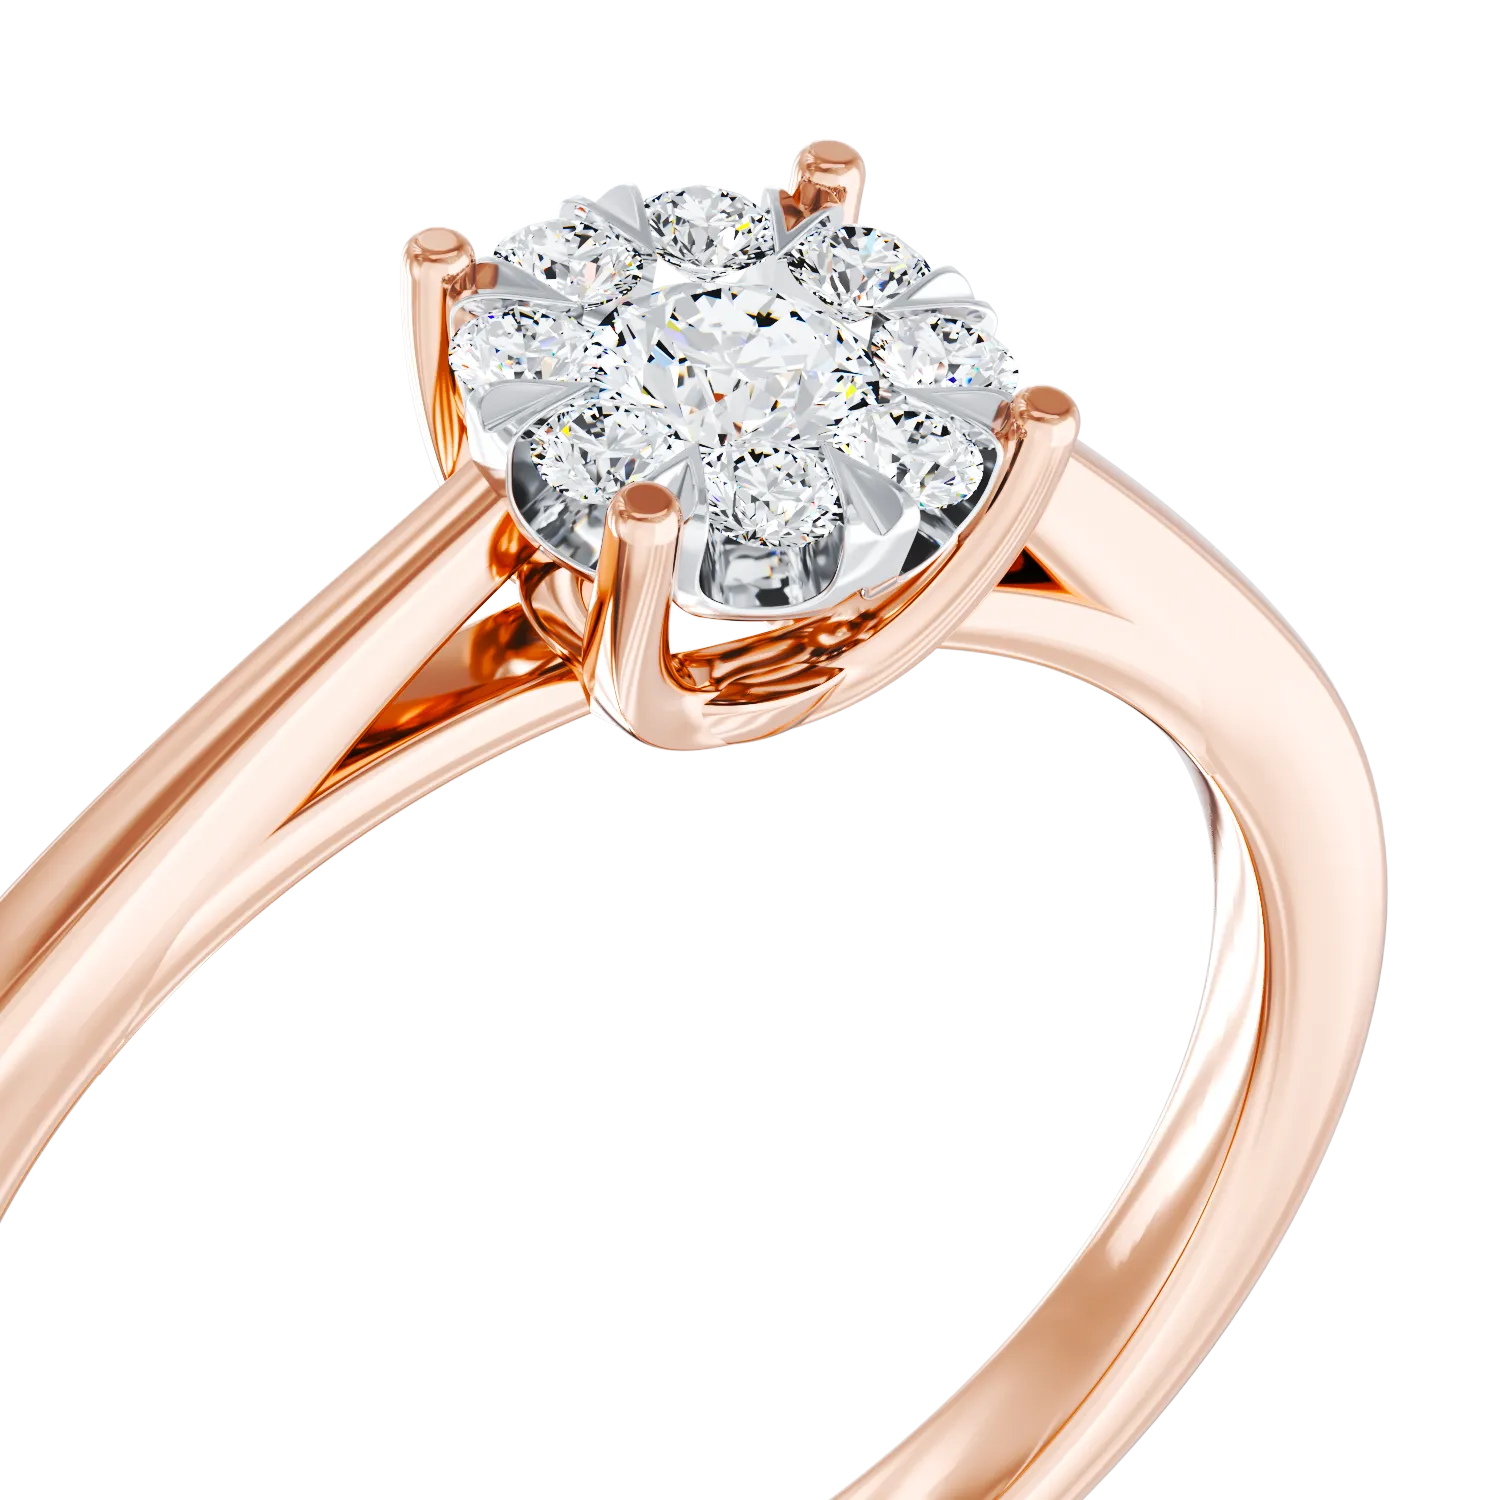 18K rose gold engagement ring with diamonds of 0.15ct